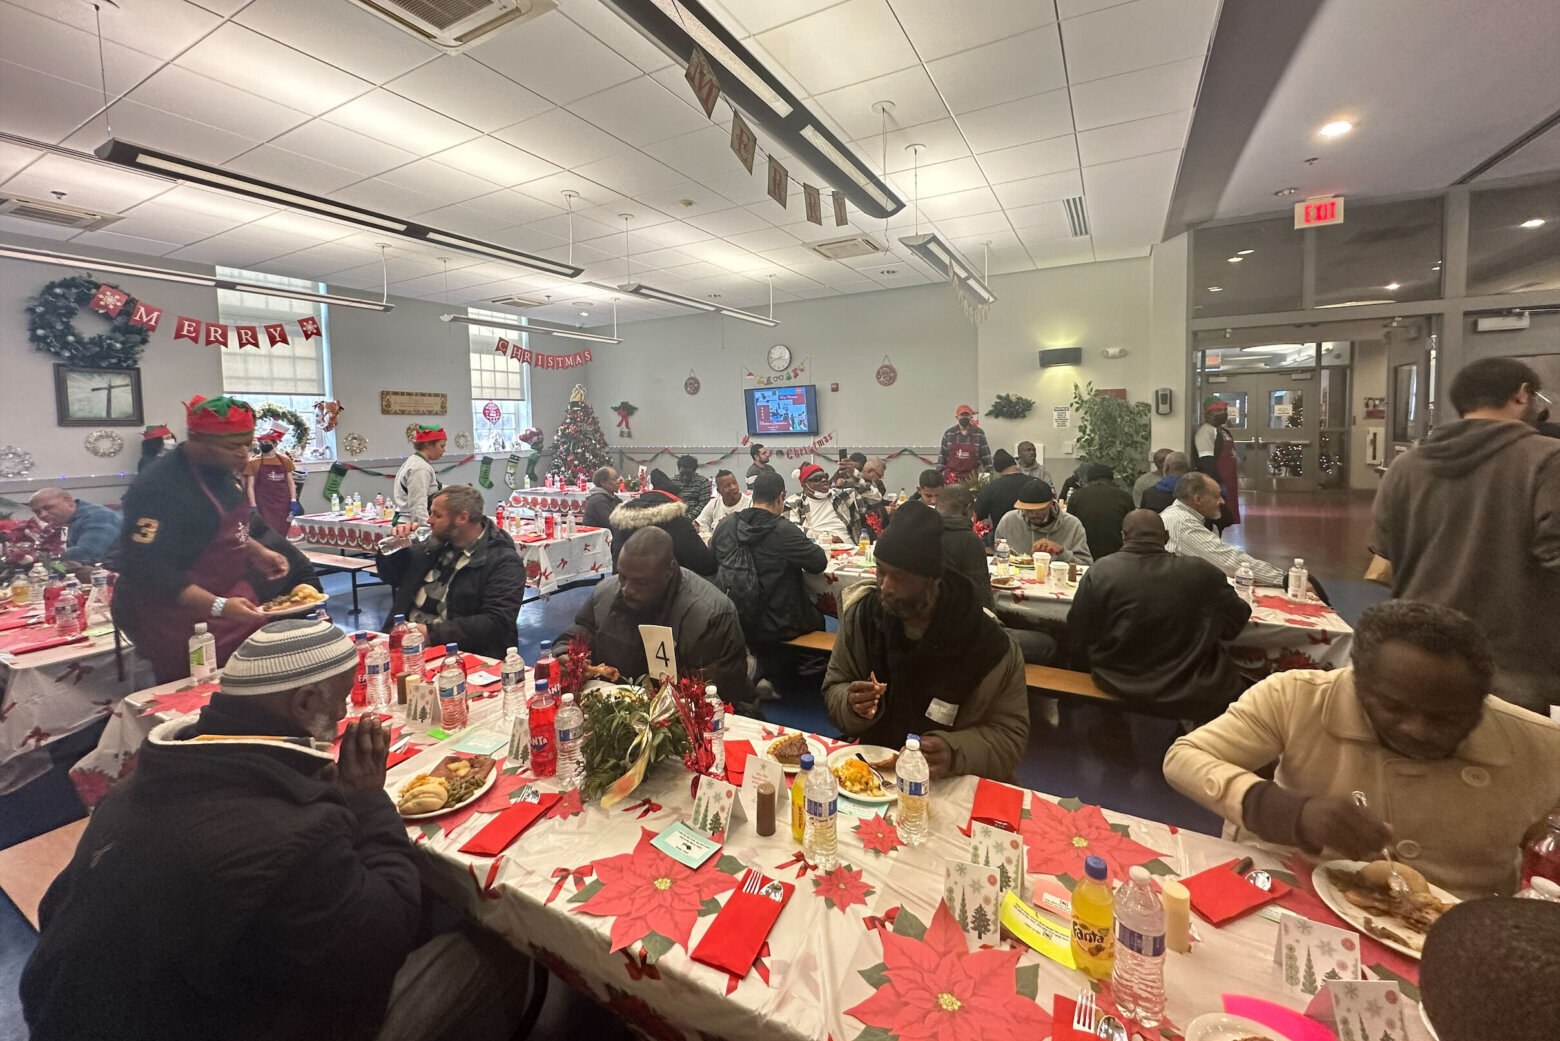 DC’s Central Union Mission provides hundreds of Christmas meals to men in need – WTOP News